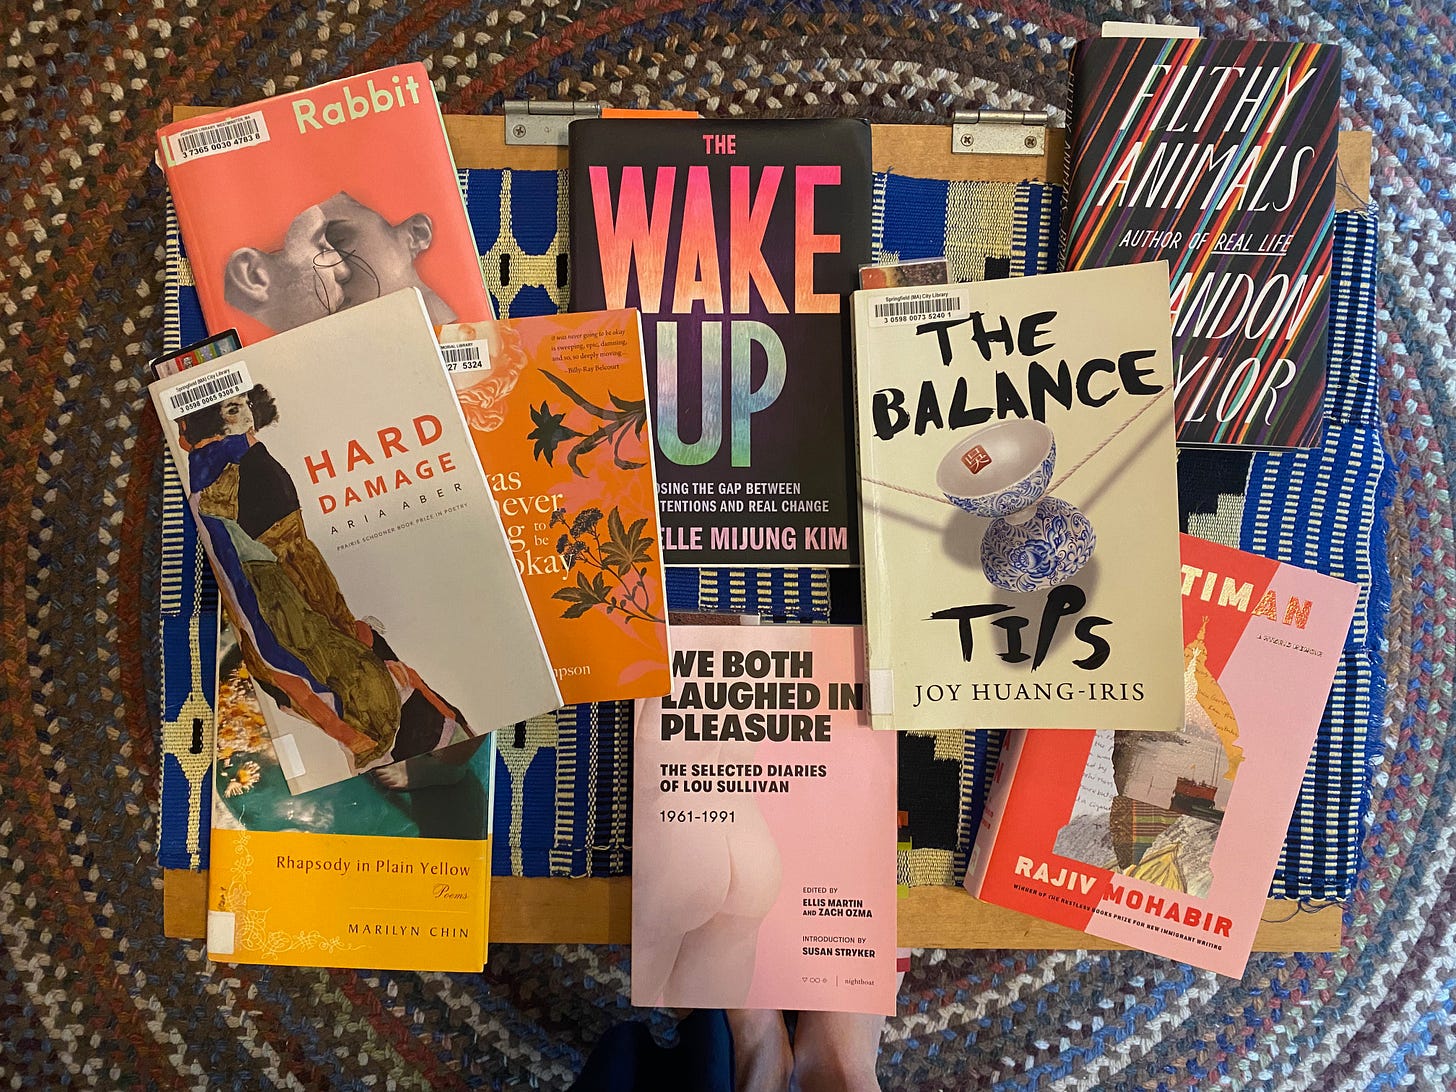 Books arranged messily on a rectangular coffee table. They include: Hard Damage, Rhapsody in Plain Yellow, It Was Never Going to Be Okay, Little Rabbit, The Balance Tips, Filthy Animals, Antiman, The Wake Up, and We Both Laughed in Pleasure.